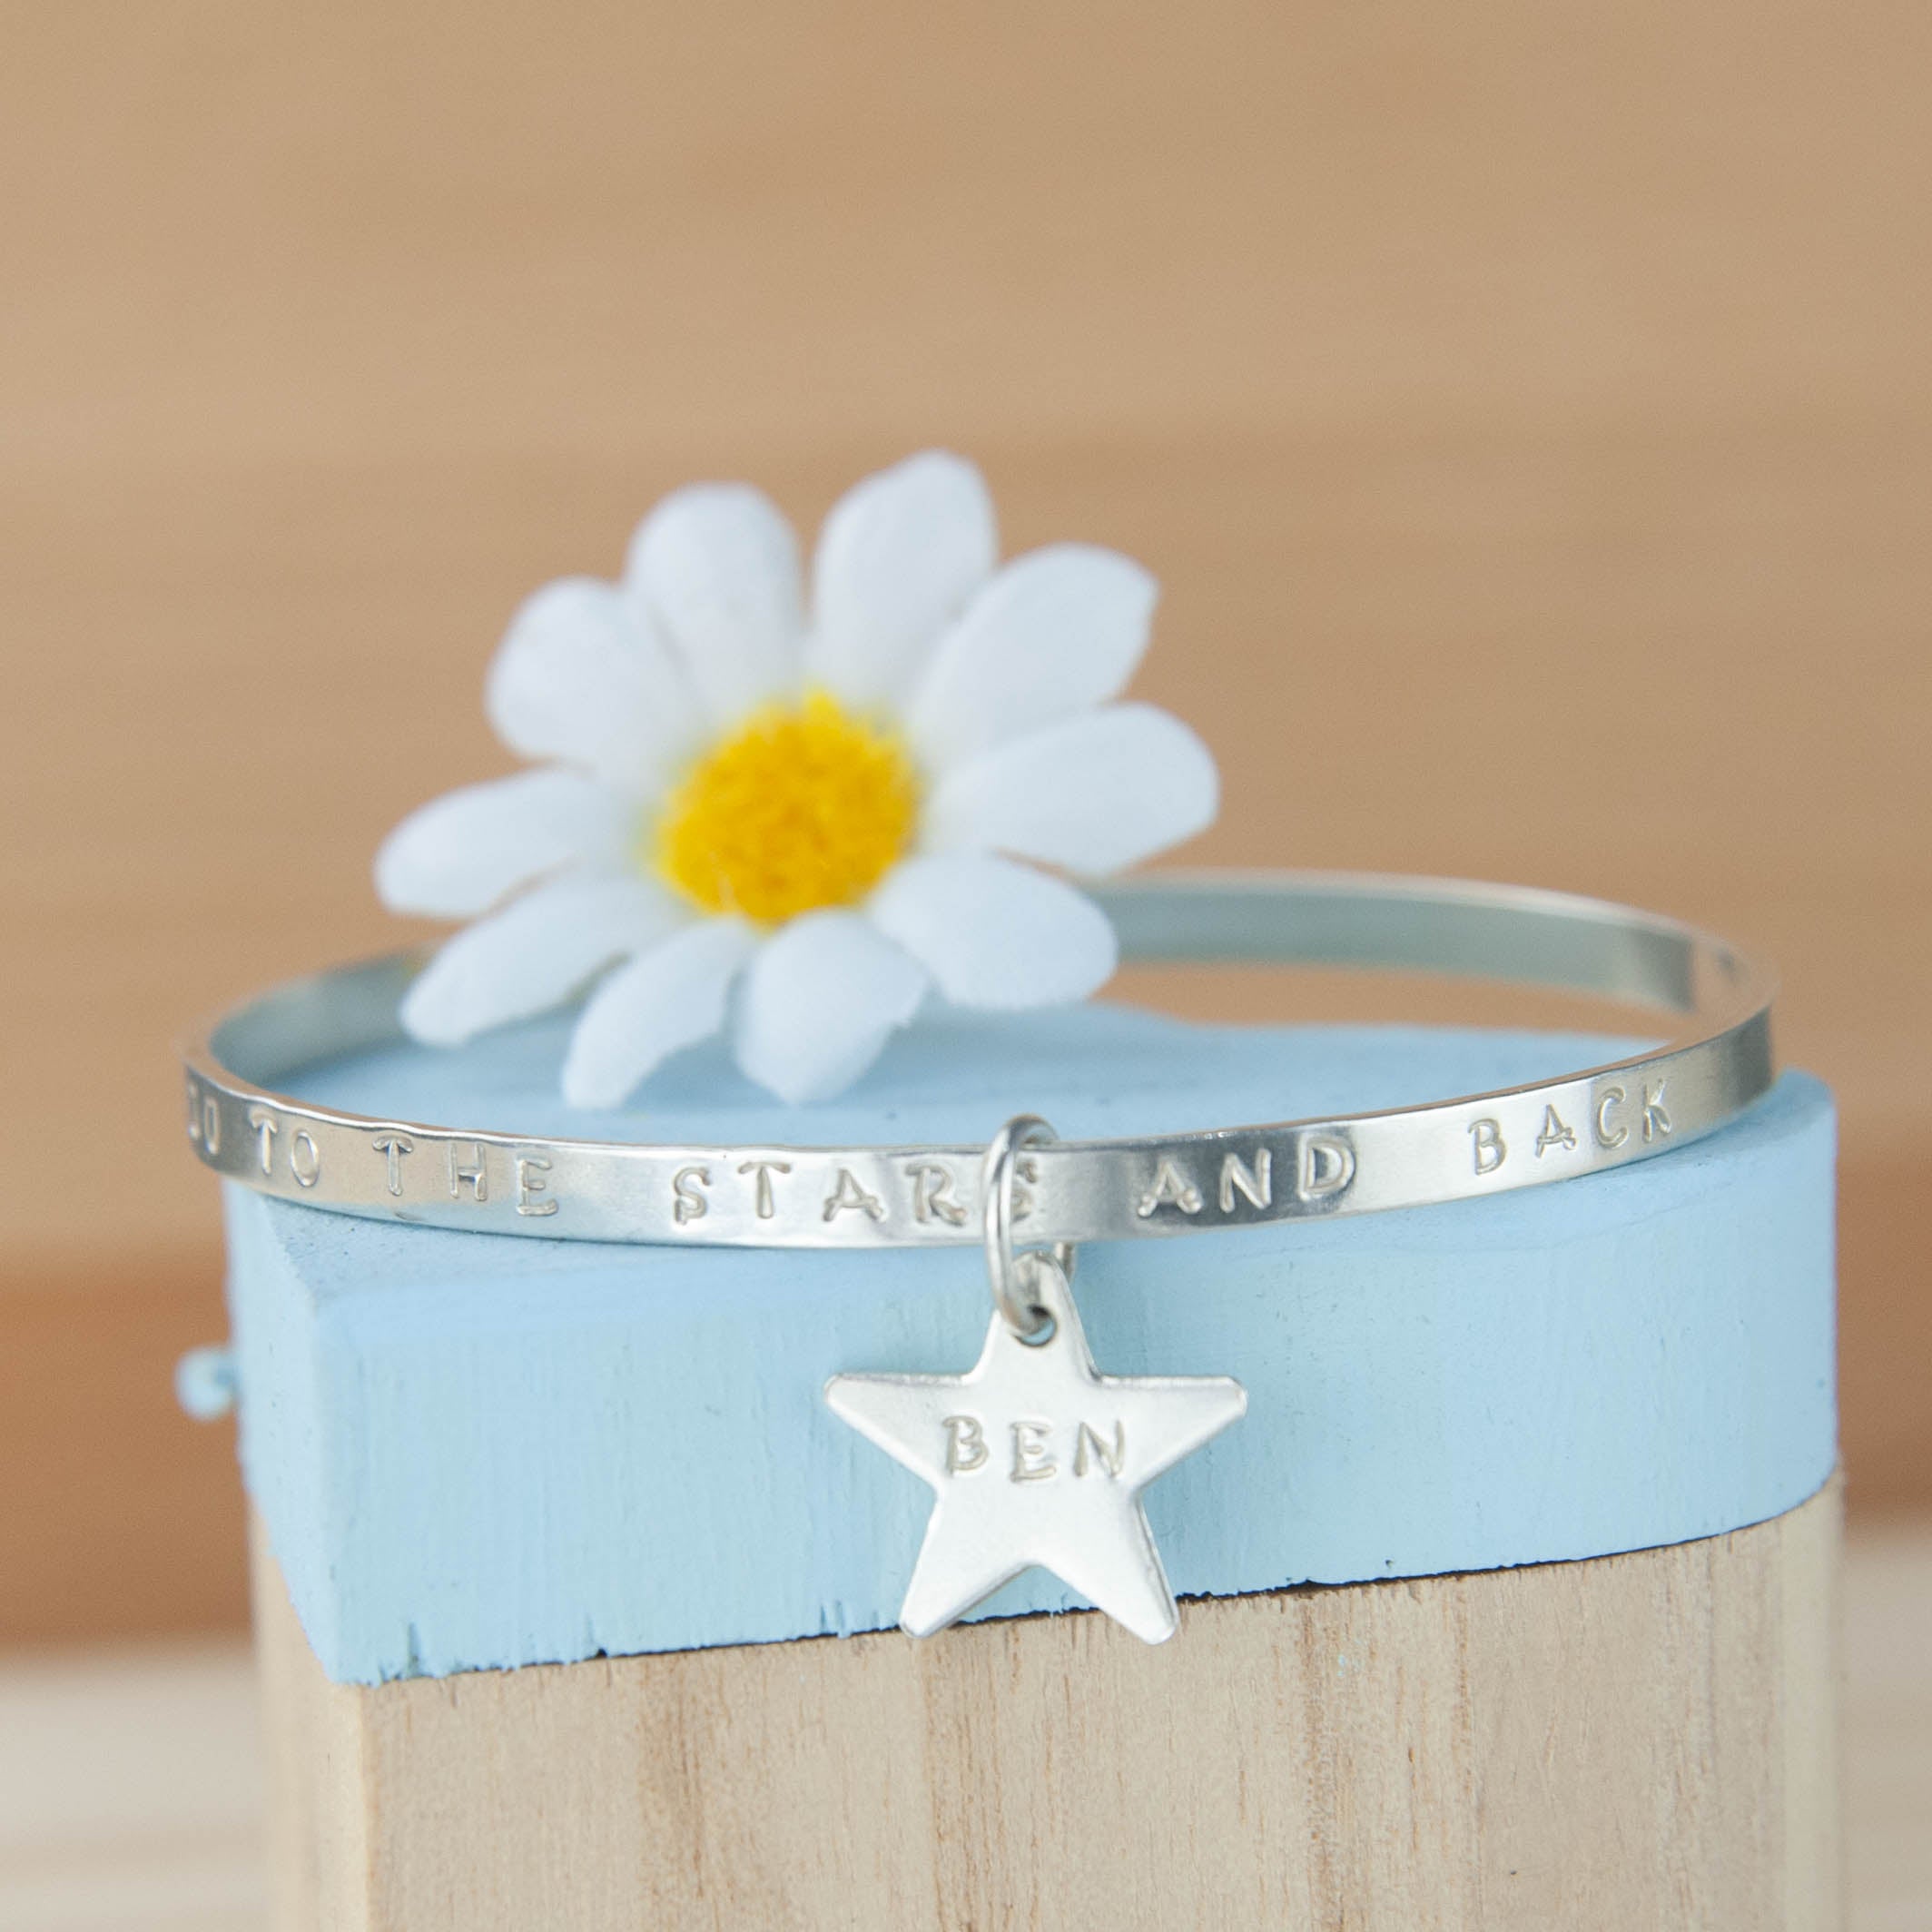 Belle & Bee Sterling silver message bangle with star charm